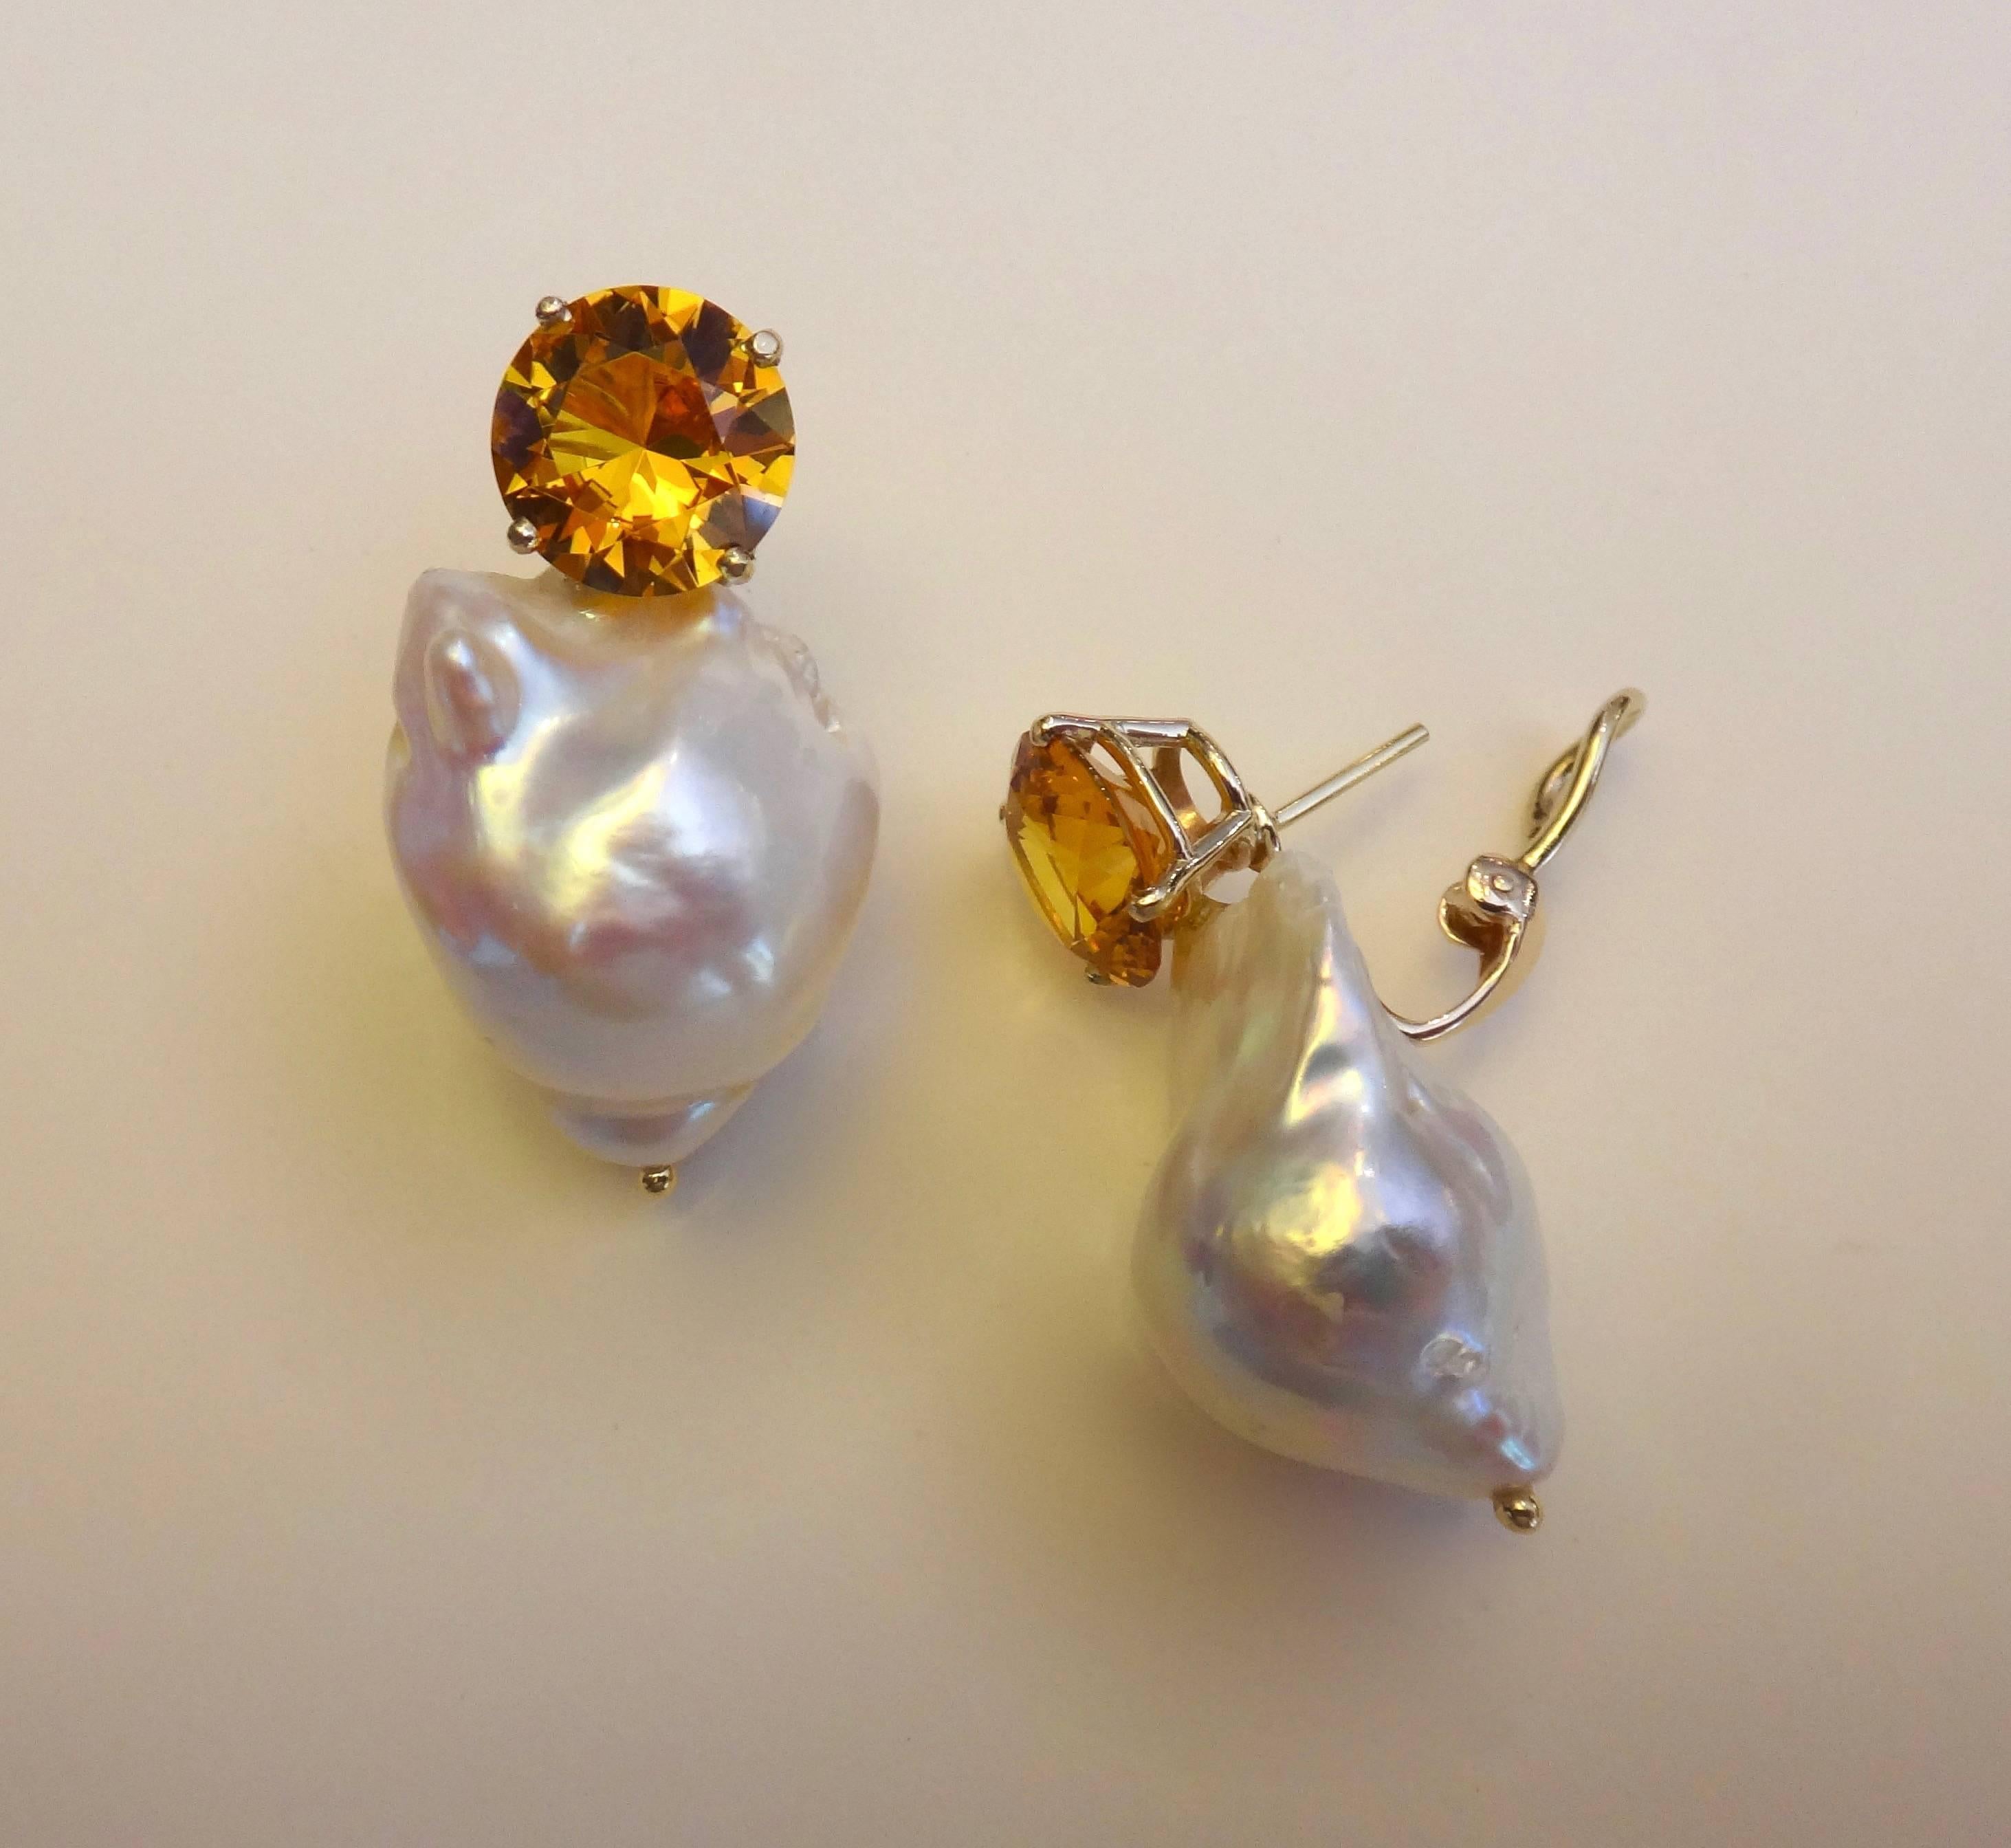 A perfectly matched pair of golden citrines are paired with a ginormous pair of white baroque cultured pearls in these dramatic earrings.  Simply set in hand fabricated settings, the earrings have posts with omega clip backs.